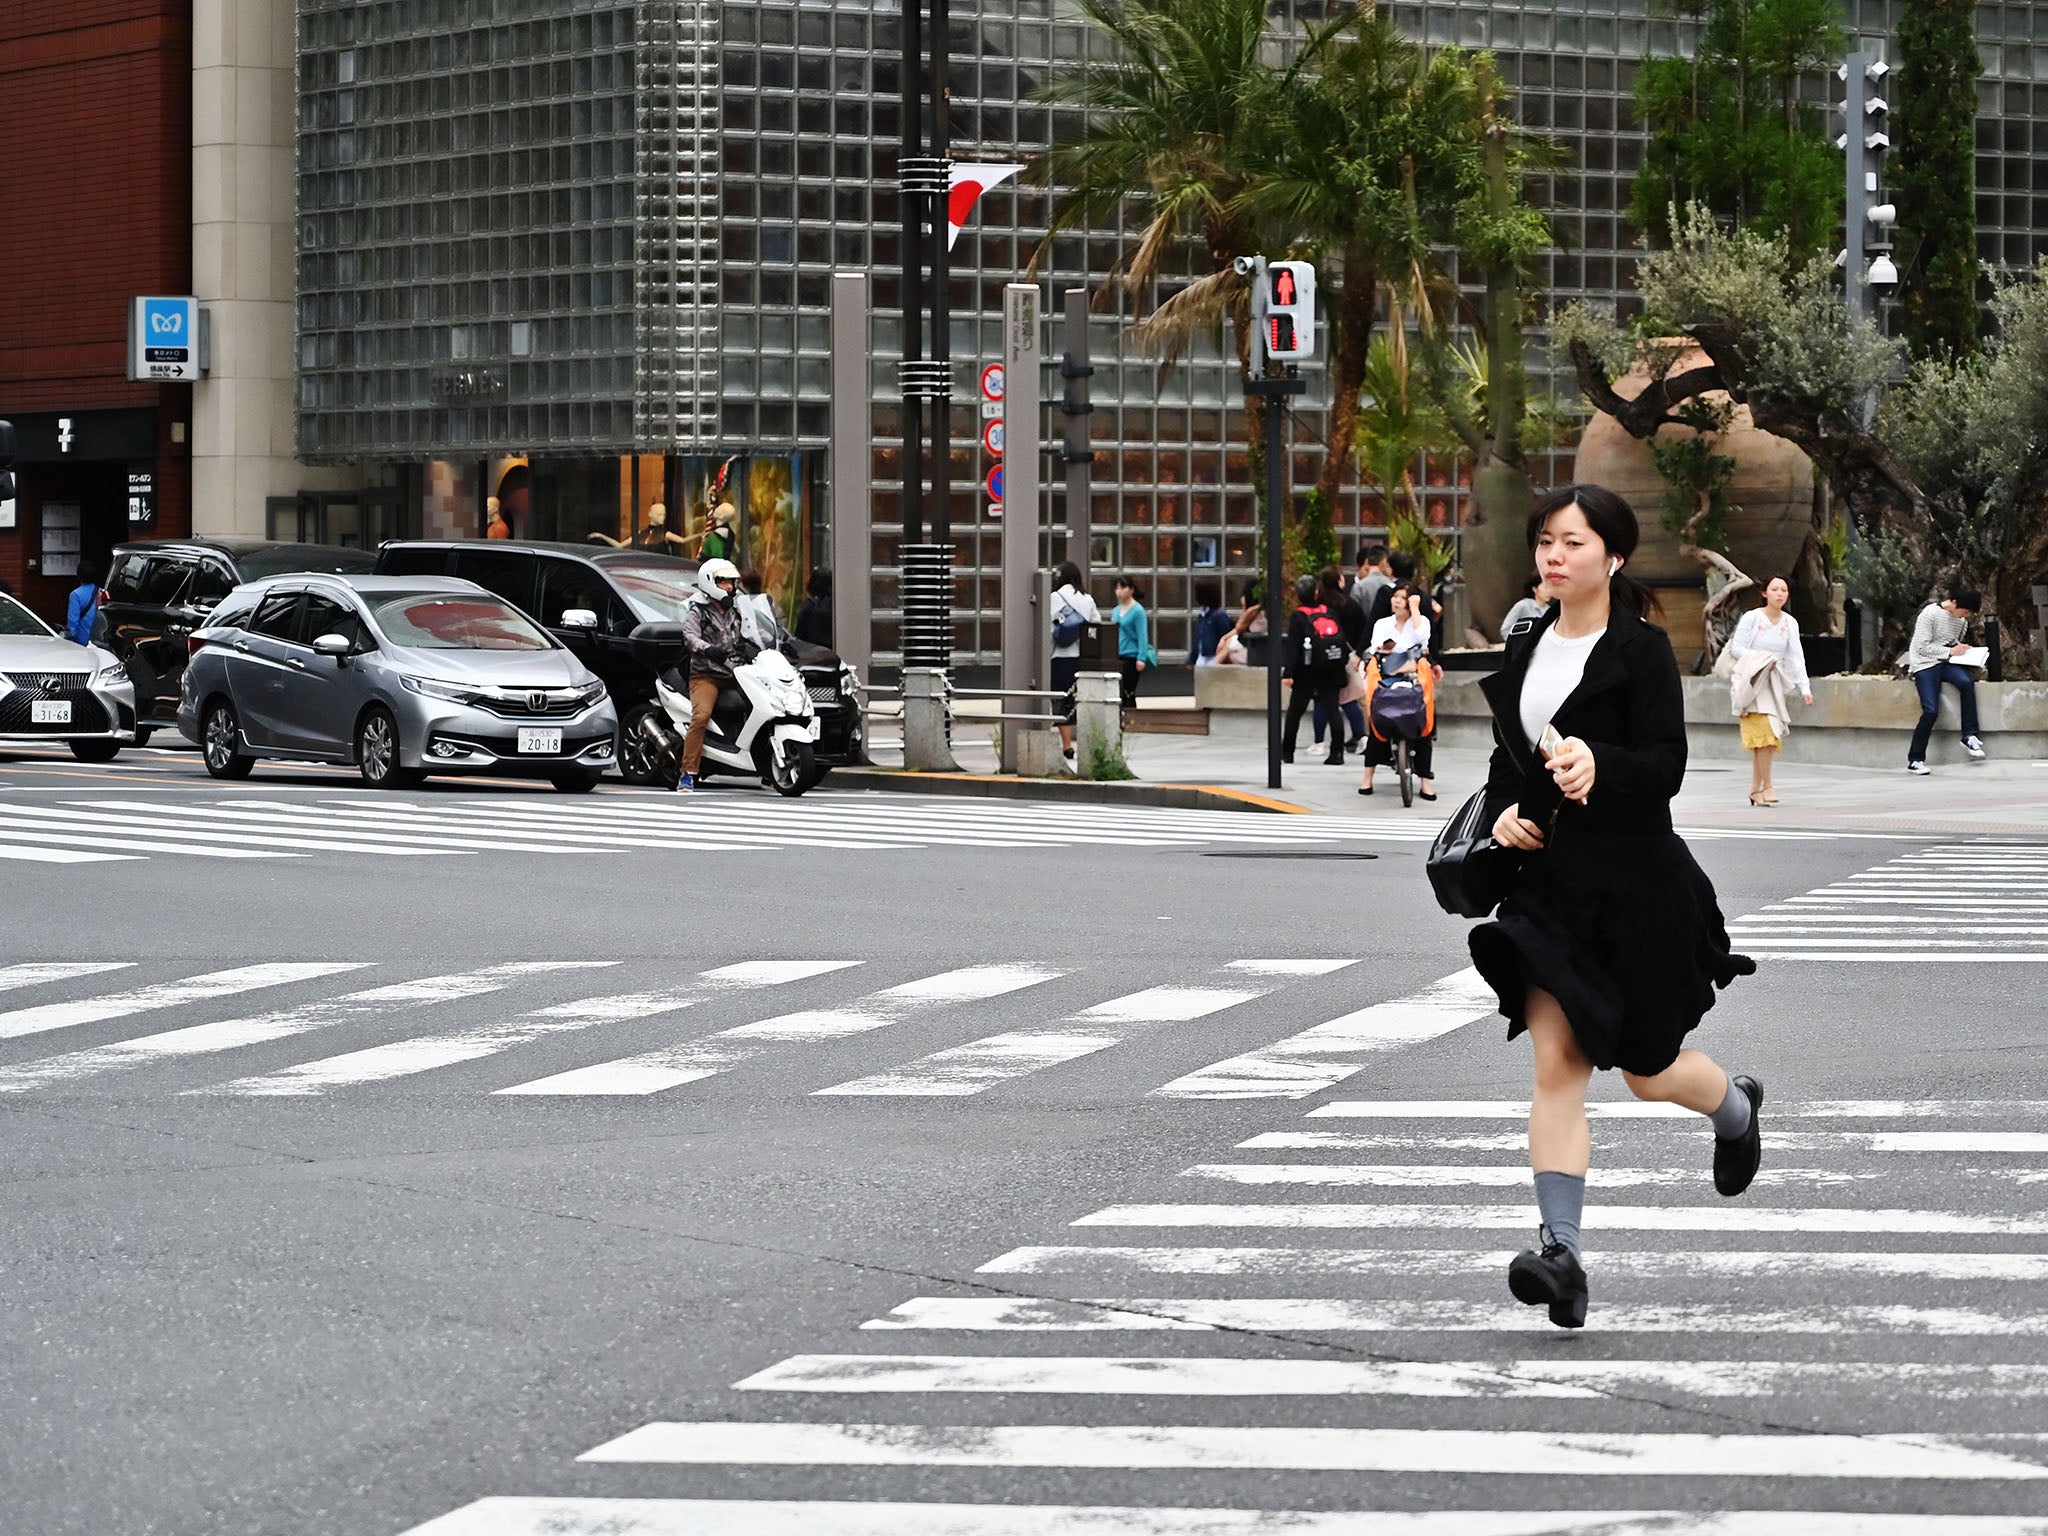 Going solo: The Japanese women rejecting marriage for the ...